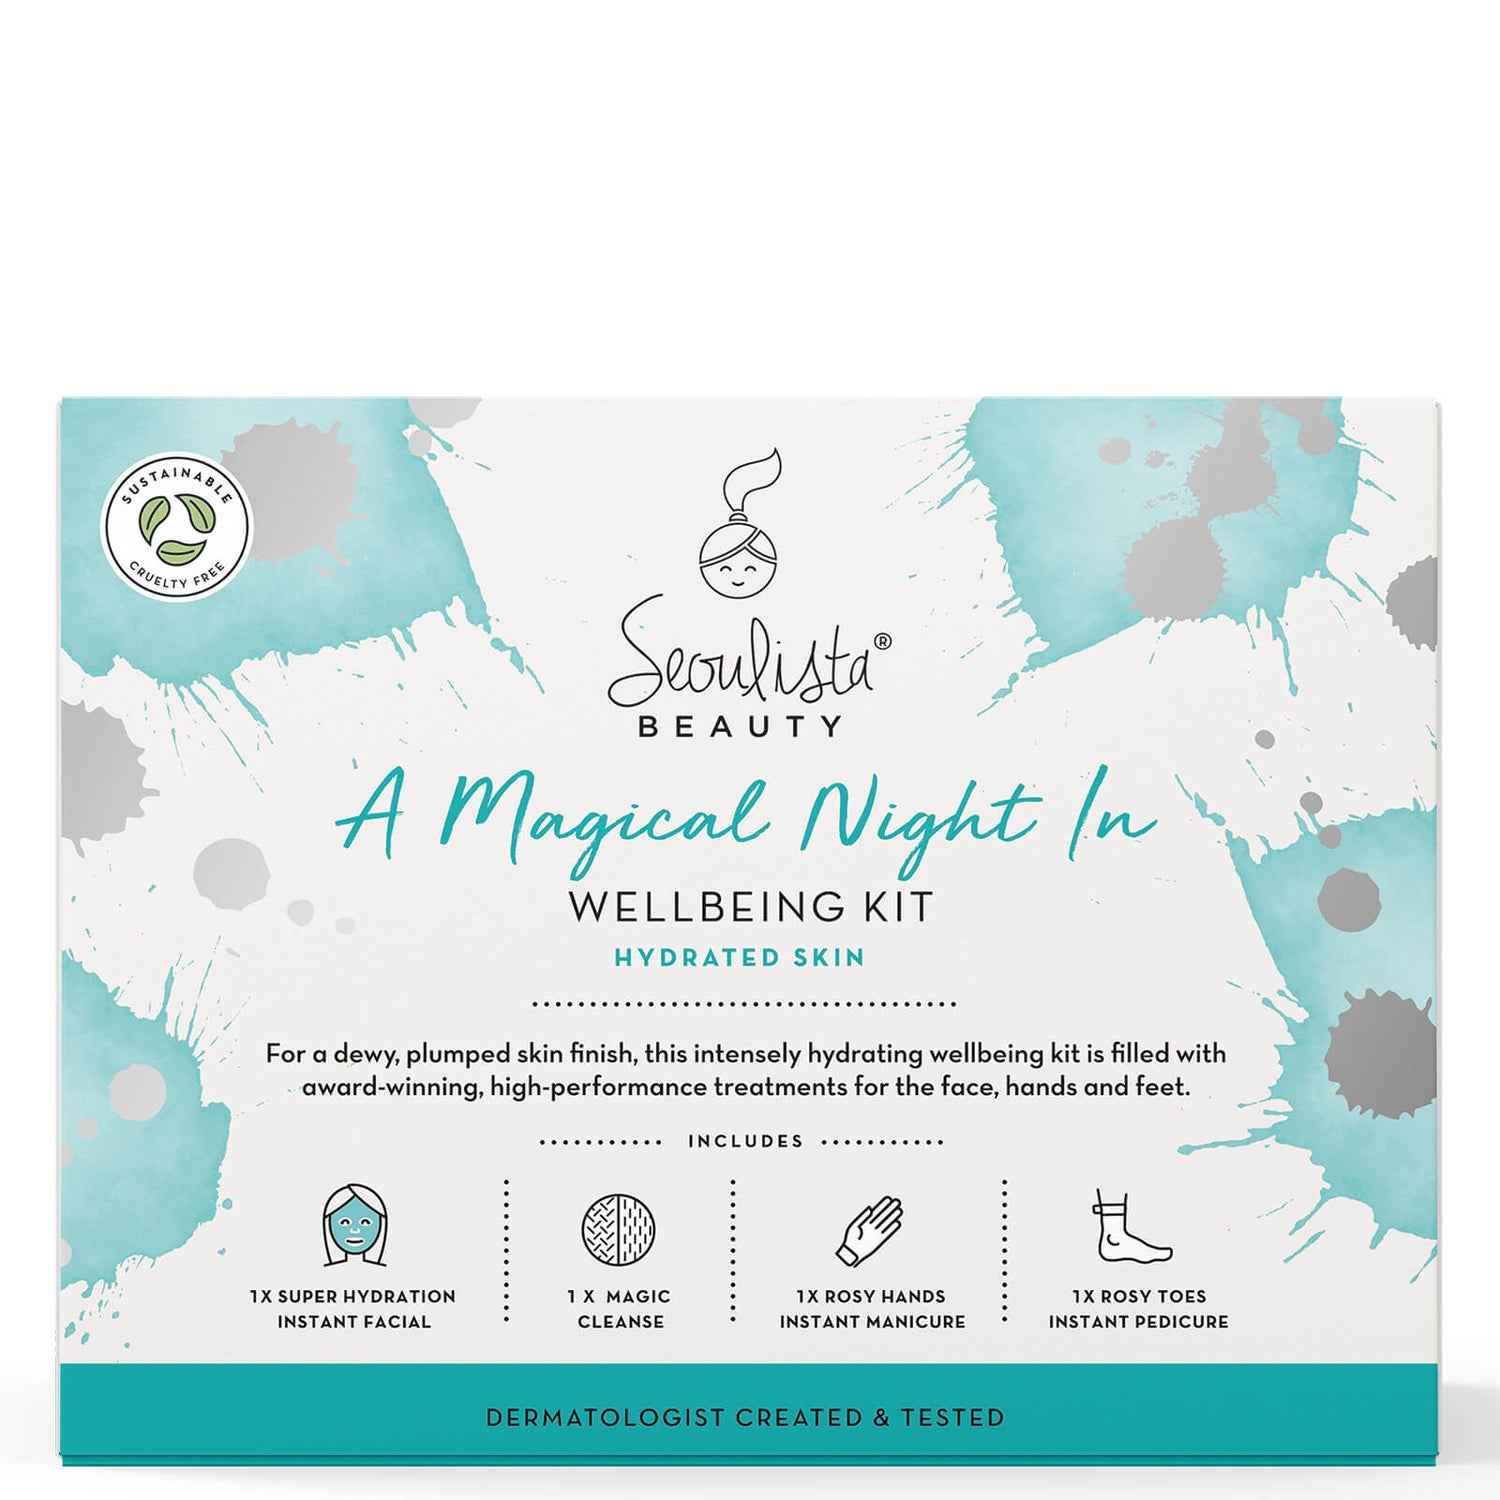 Seoulista Beauty A Magical Night In Wellbeing Kit -setti - Hydrated Skin